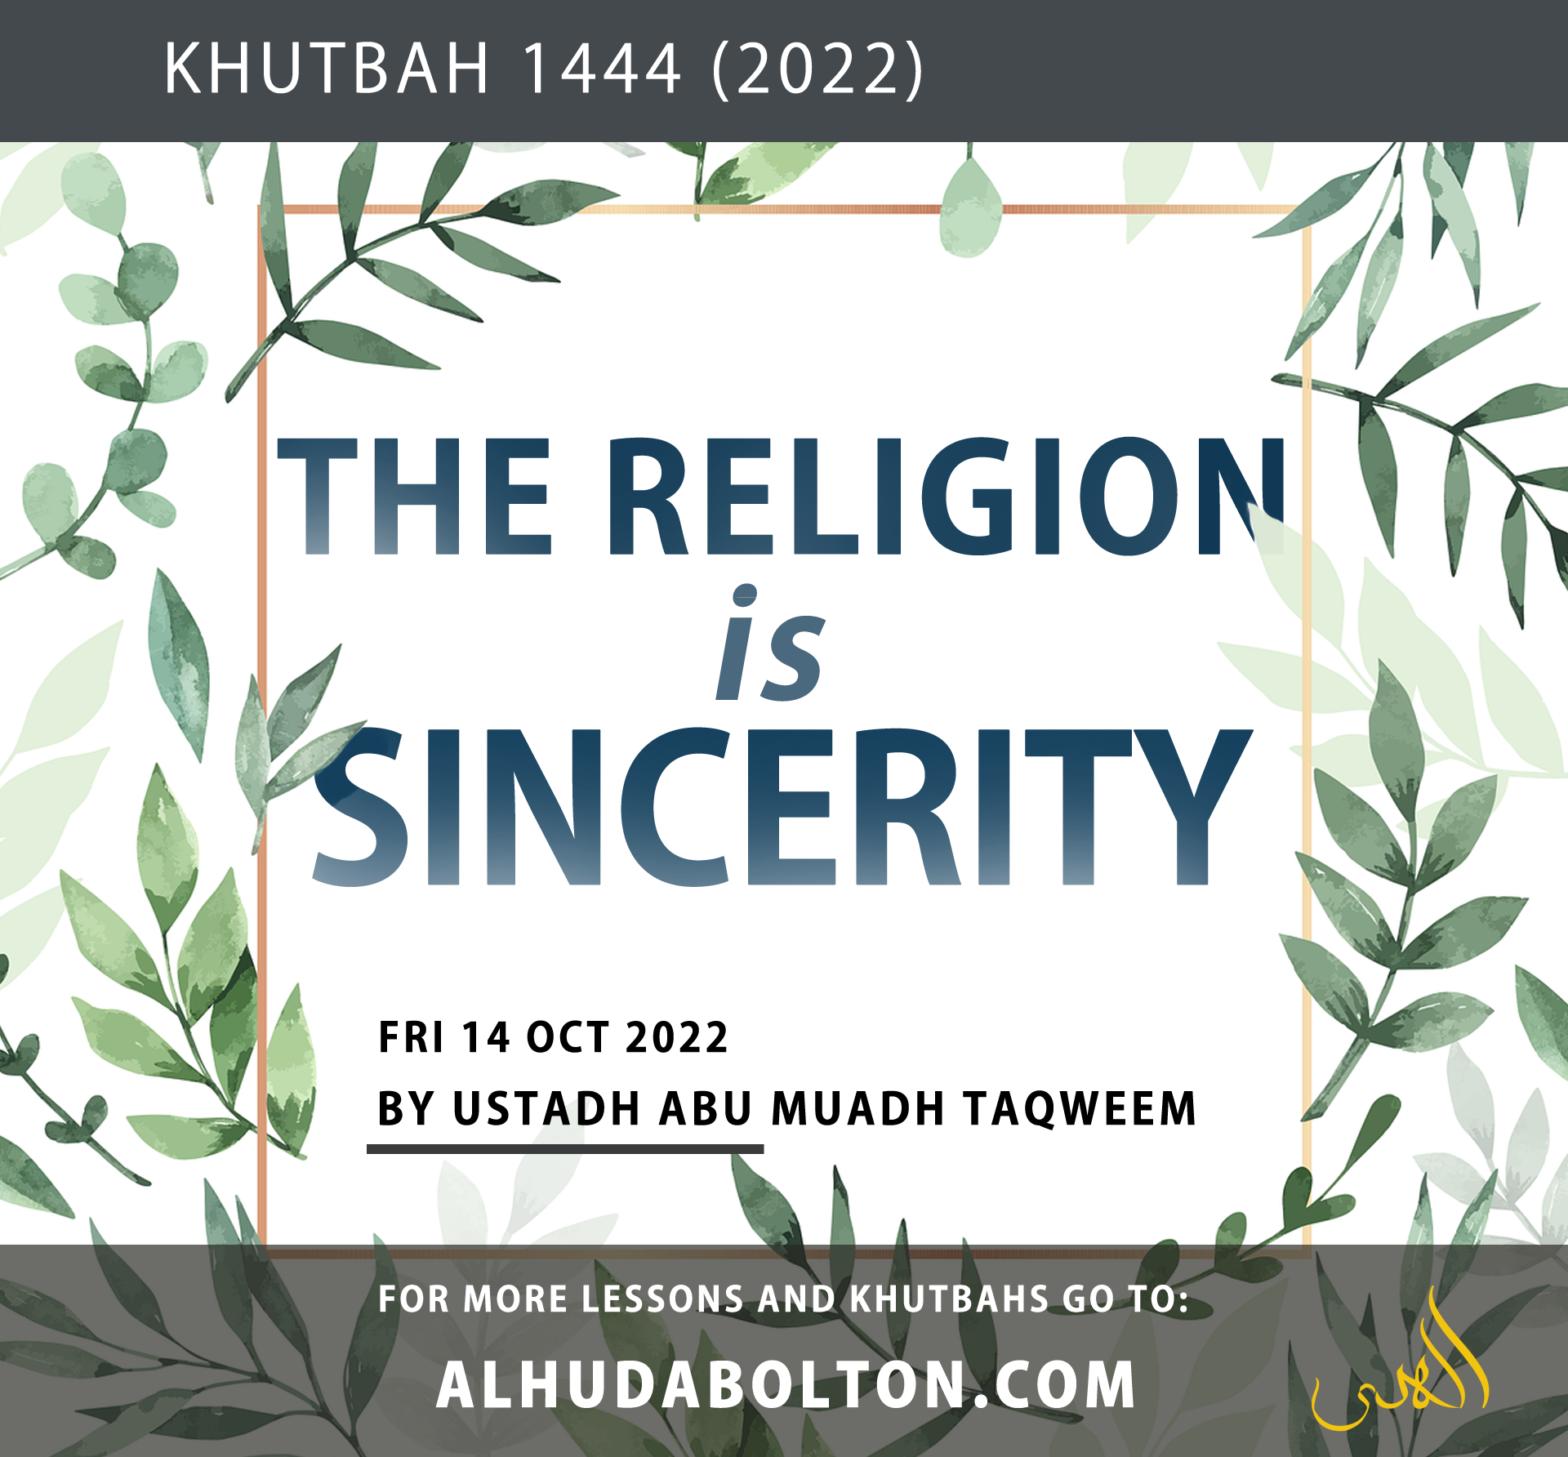 Khutbah: The Religion is Sincerity